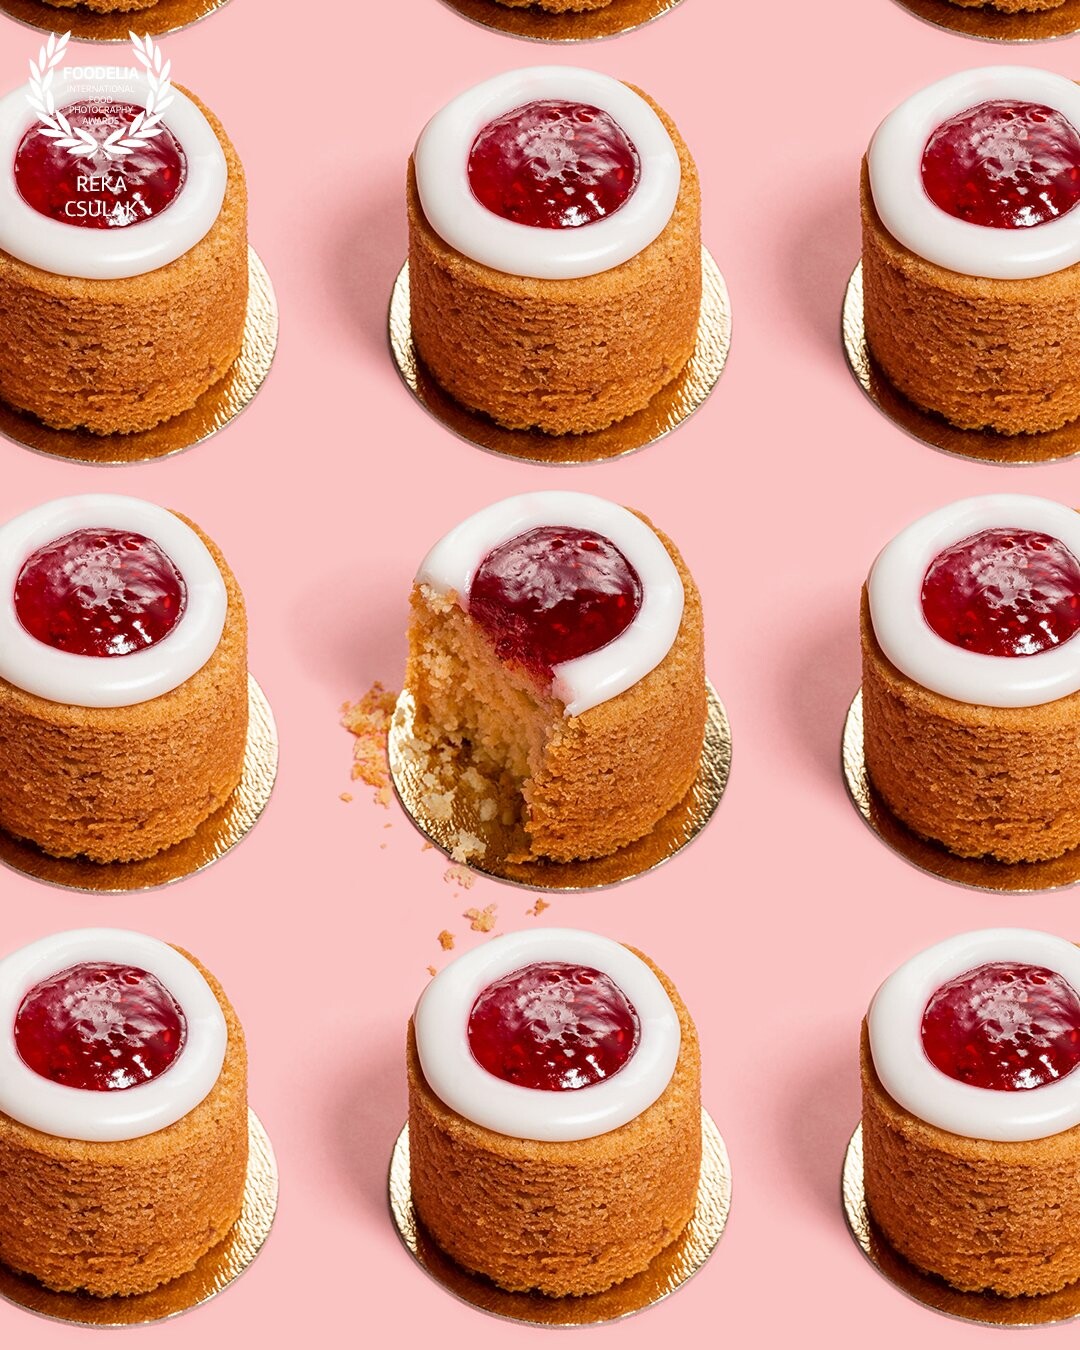 Personal project with delicious Runeberg cakes sourced from the industry's most popular label on the Finnish market. The beauty of picture-perfect repetition with an additional piece that is showing the delicious inner texture and some crumbs after enjoying the first bite!